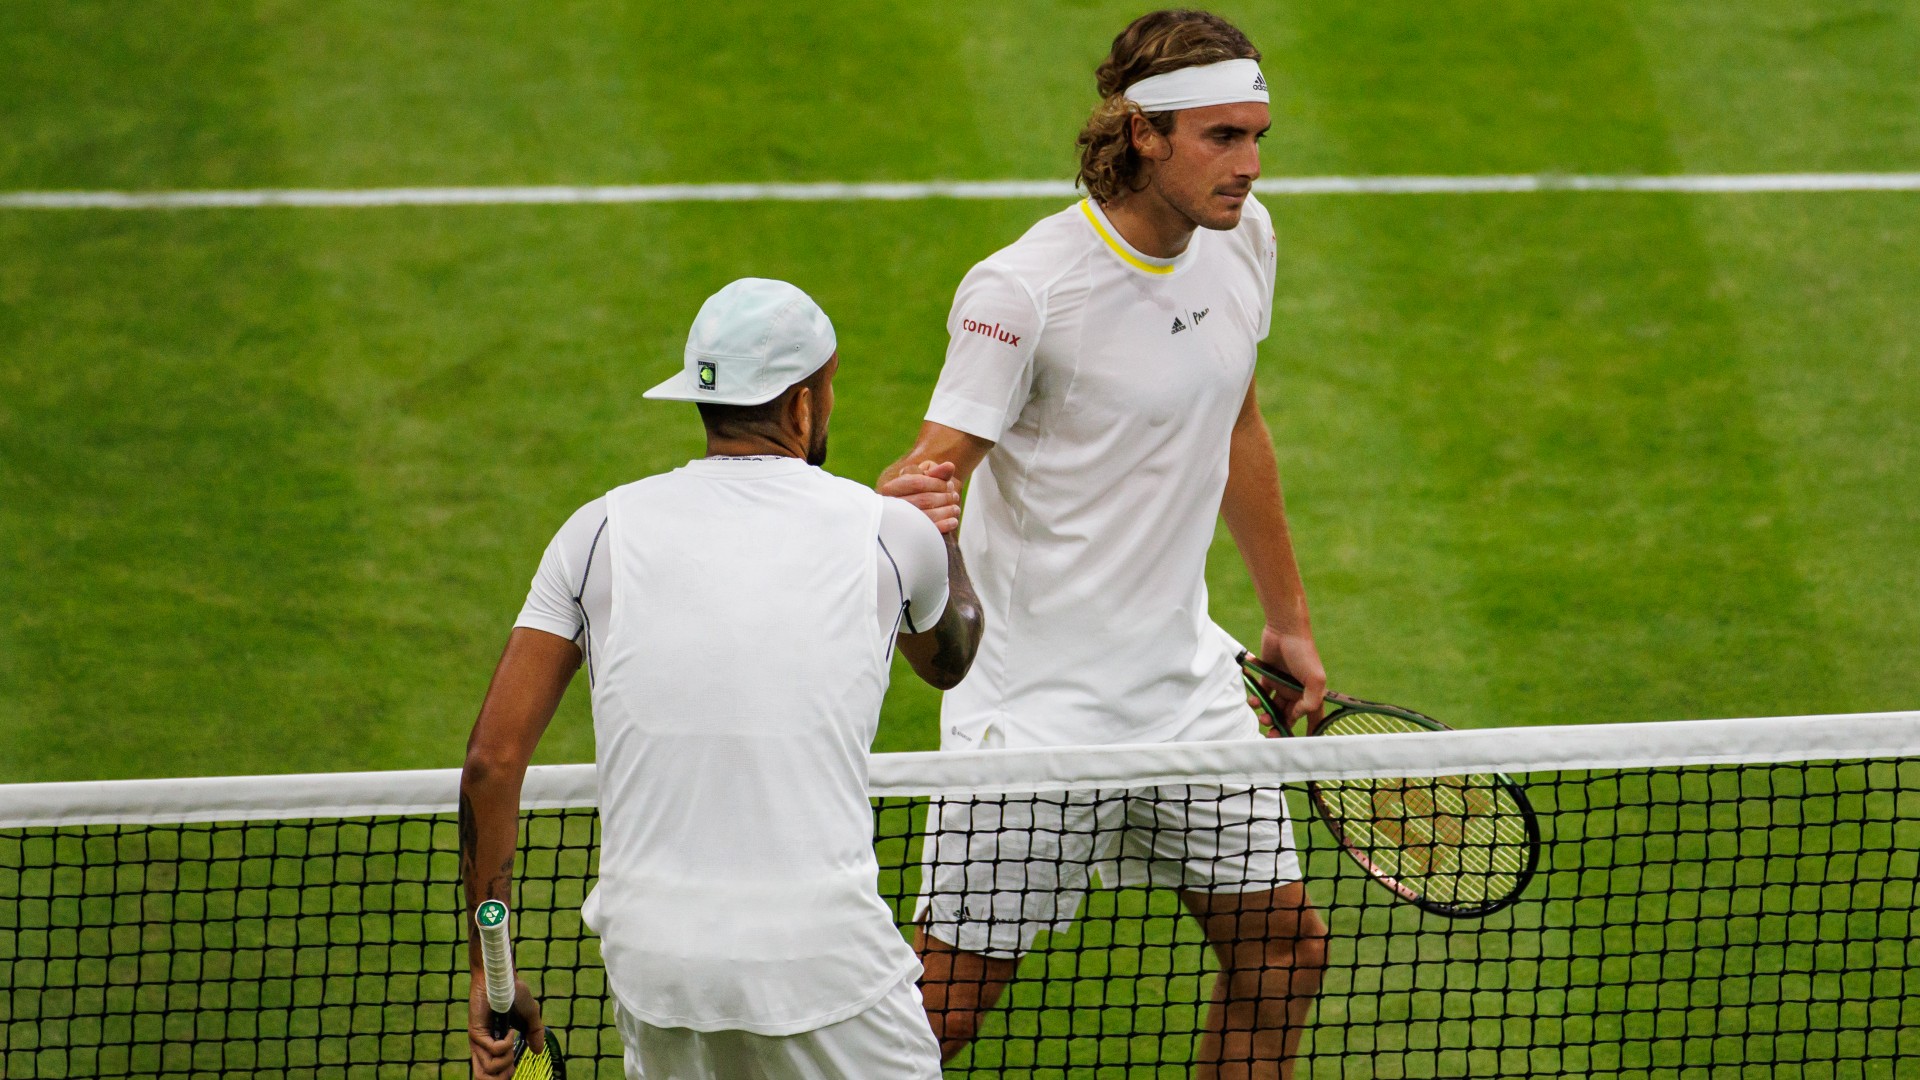 Wimbledon 2022 Nick Kyrgios and Stefanos Tsitsipas hit with fines after fiery match